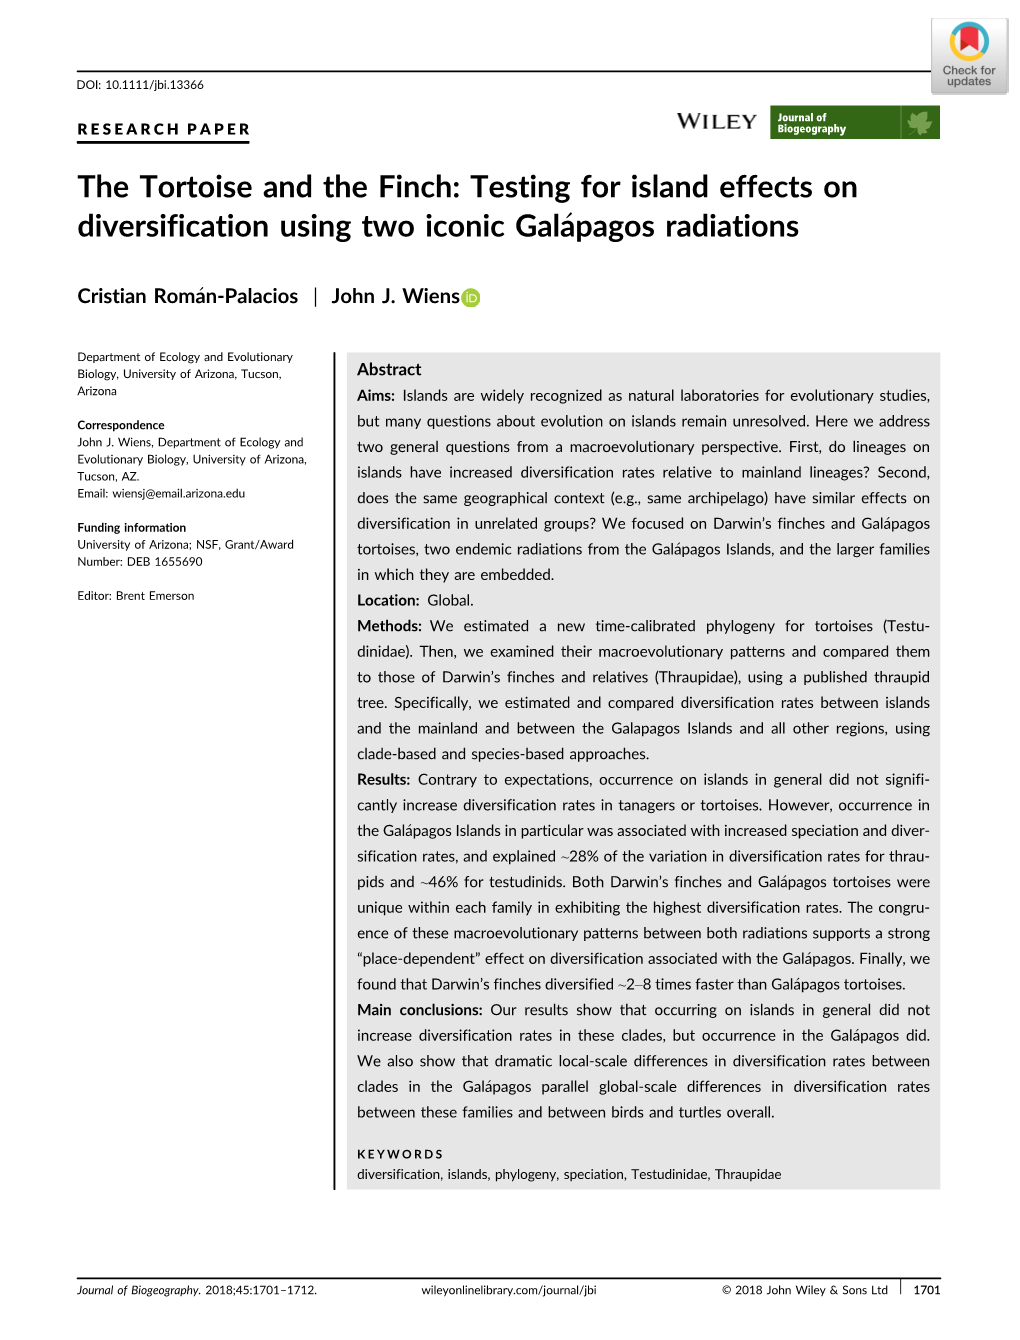 Testing for Island Effects on Diversification Using Two Iconic Galapagos� Radiations